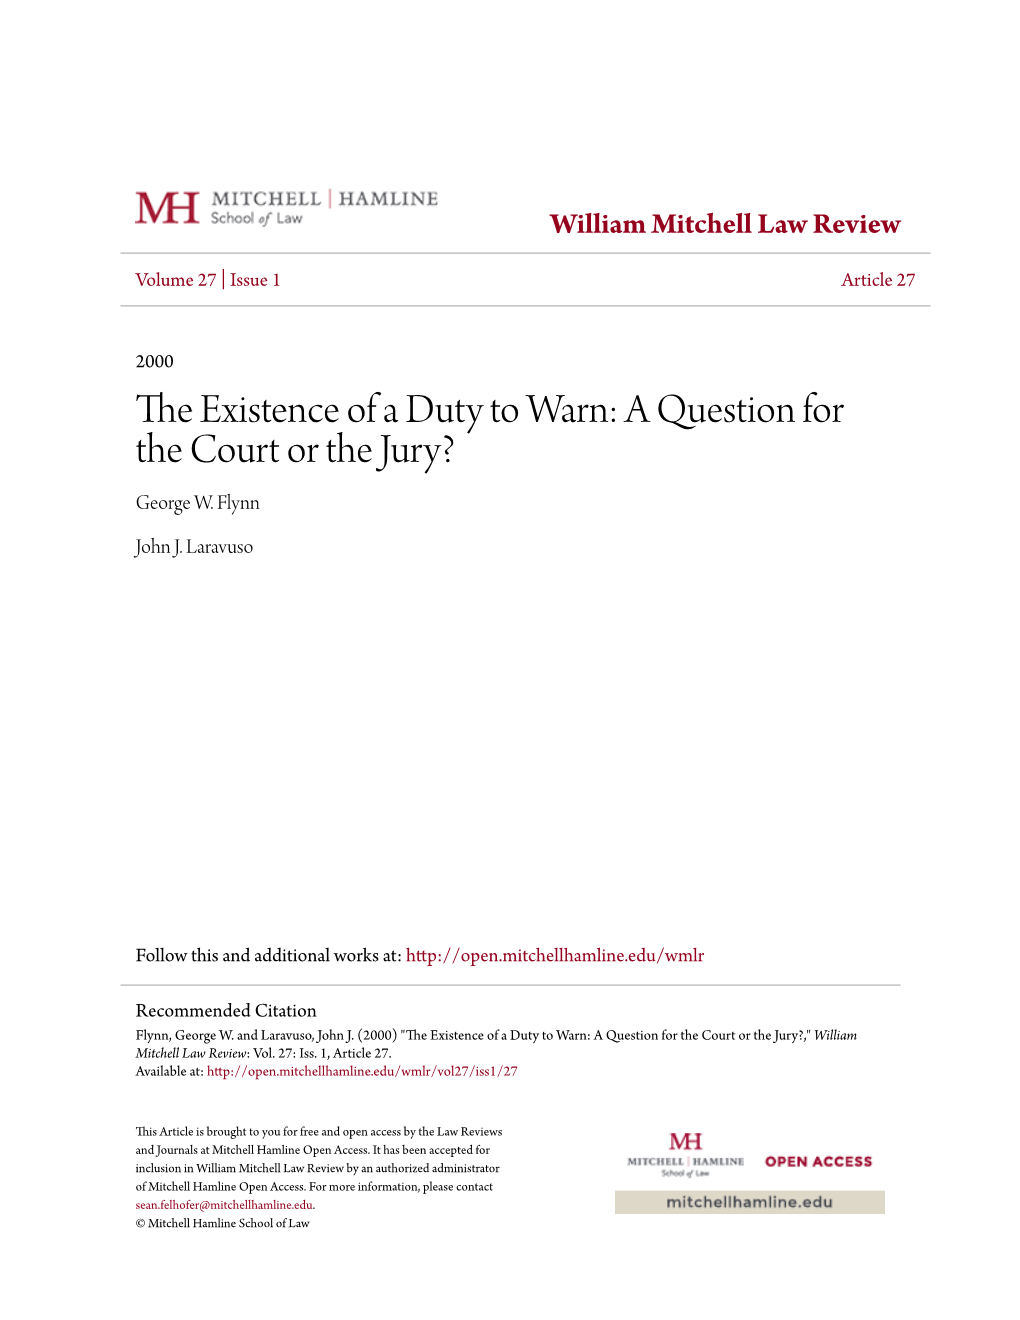 The Existence of a Duty to Warn: a Question for the Court Or the Jury? George W